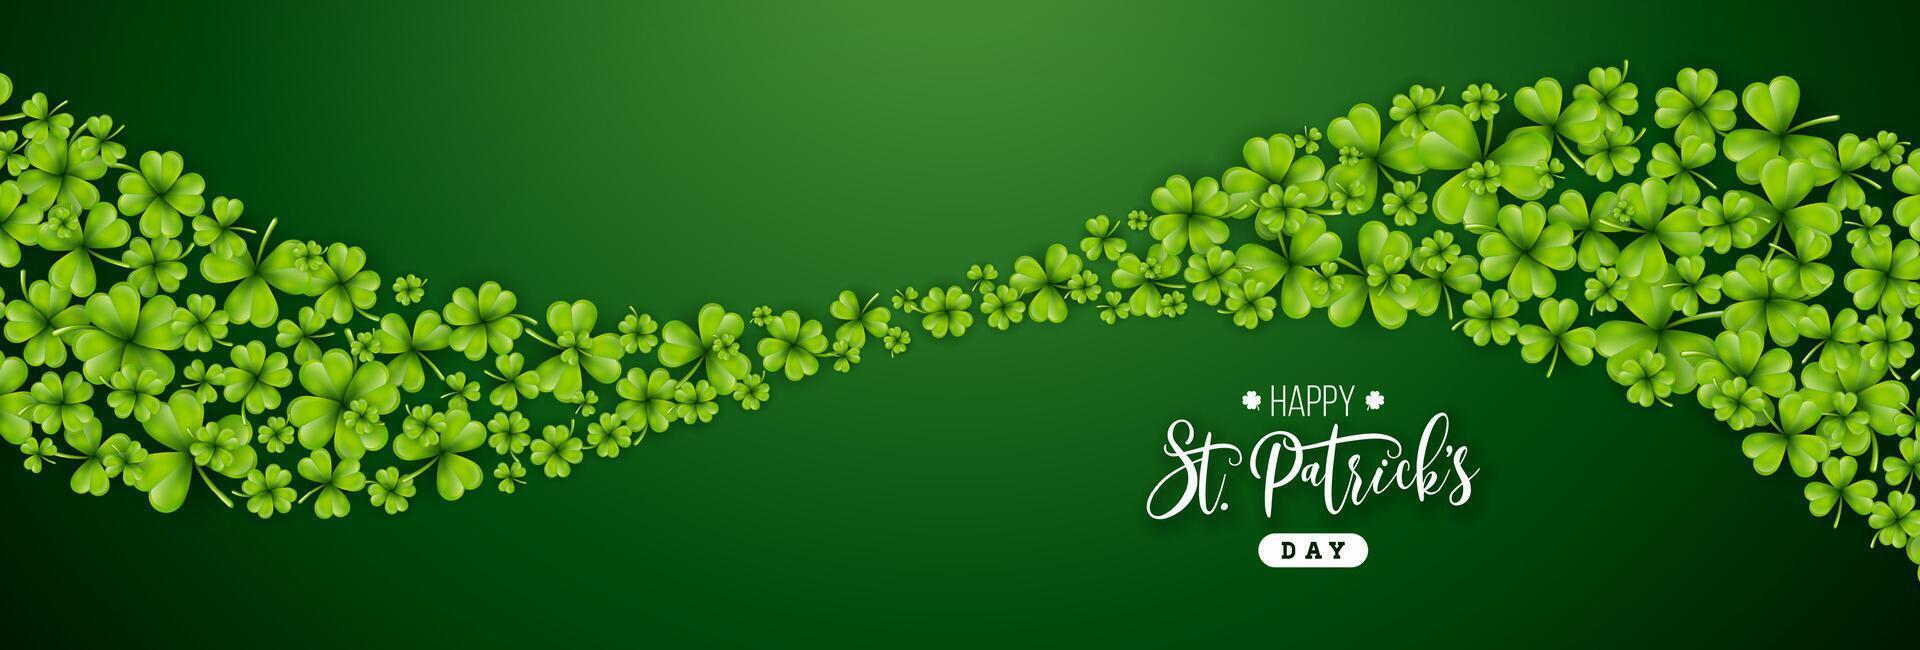 Saint Patrick's Day Illustration with Flying Clover Leaves and Typography Letter on Green Background. Irish St. Patricks Lucky Celebration Vector Design for Flyer, Greeting Card, Web Banner, Holiday